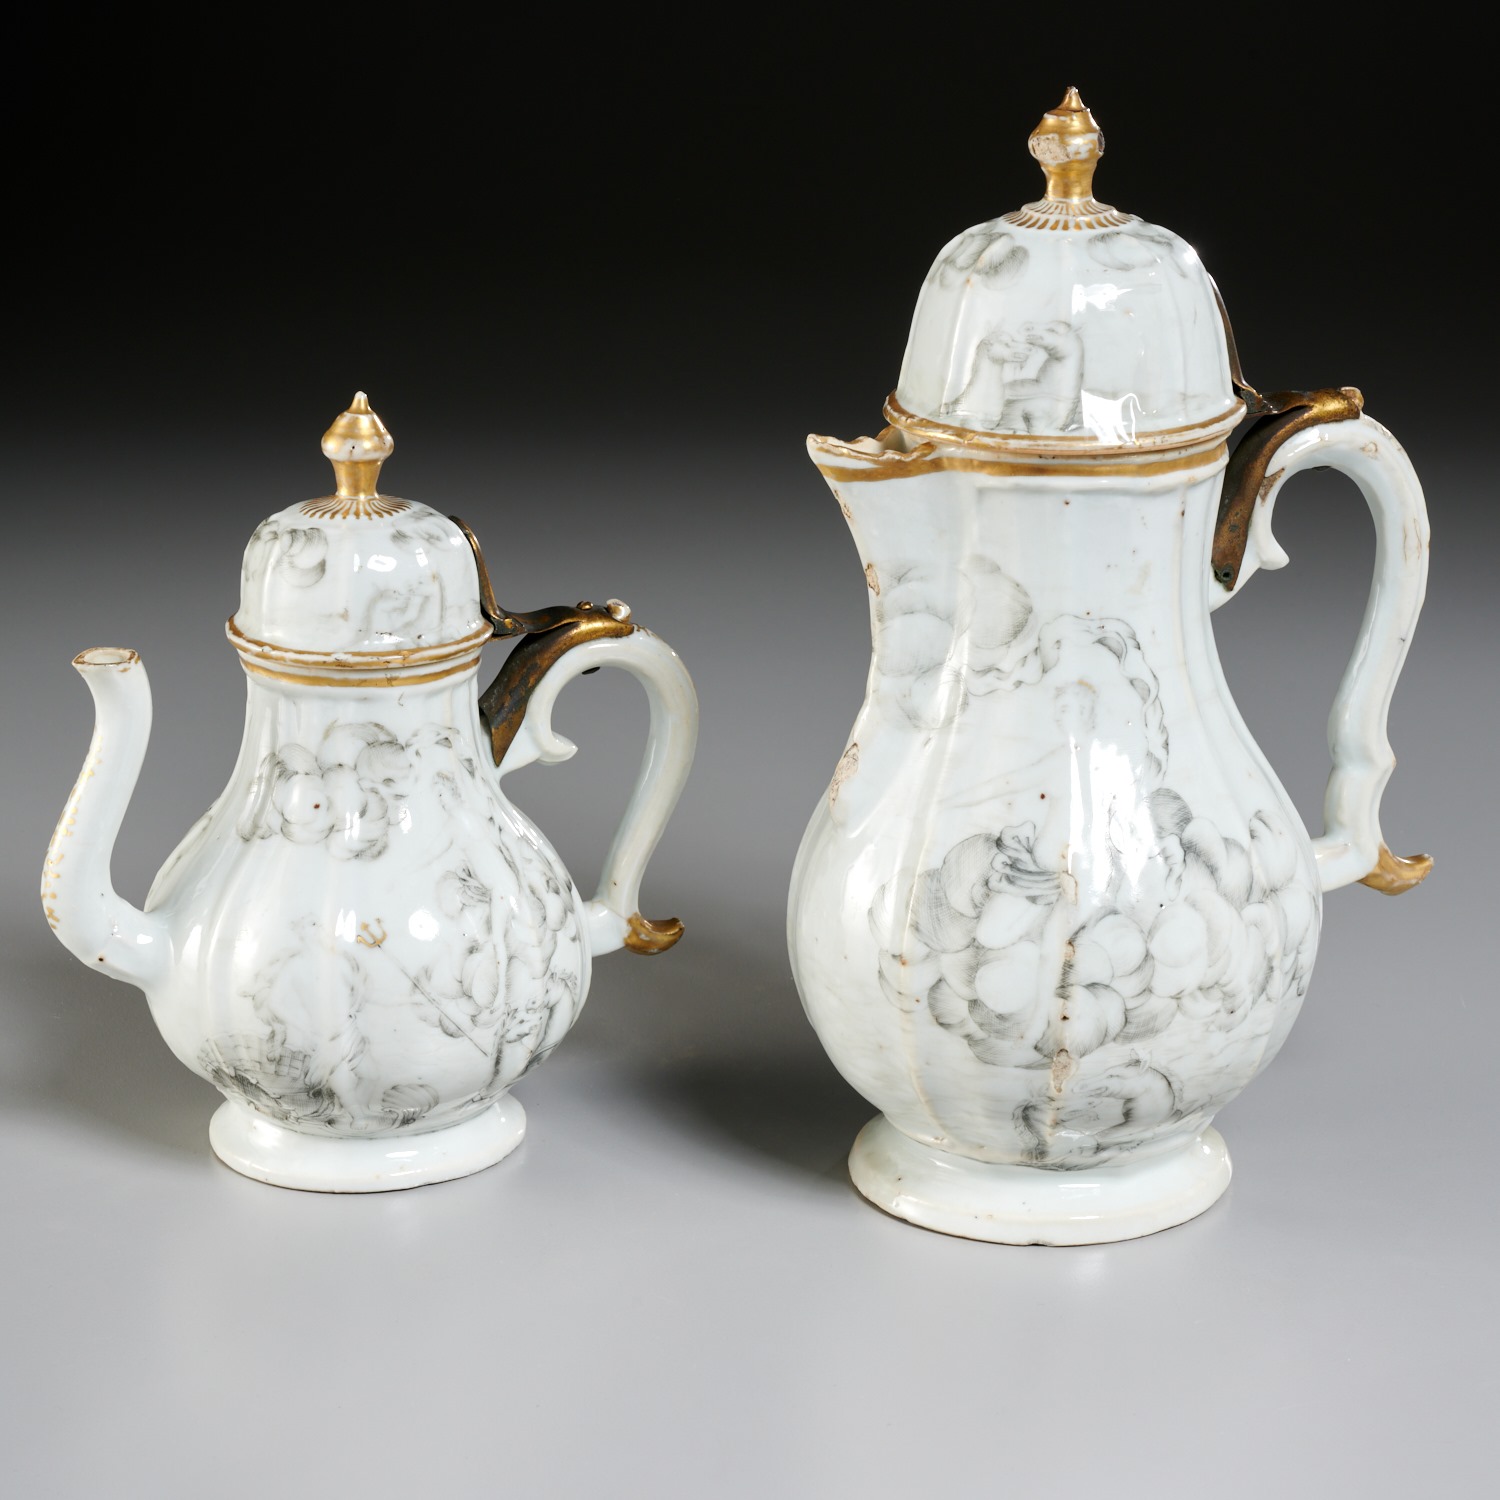  2 CHINESE EXPORT TEAPOTS GREEK 2a5d75